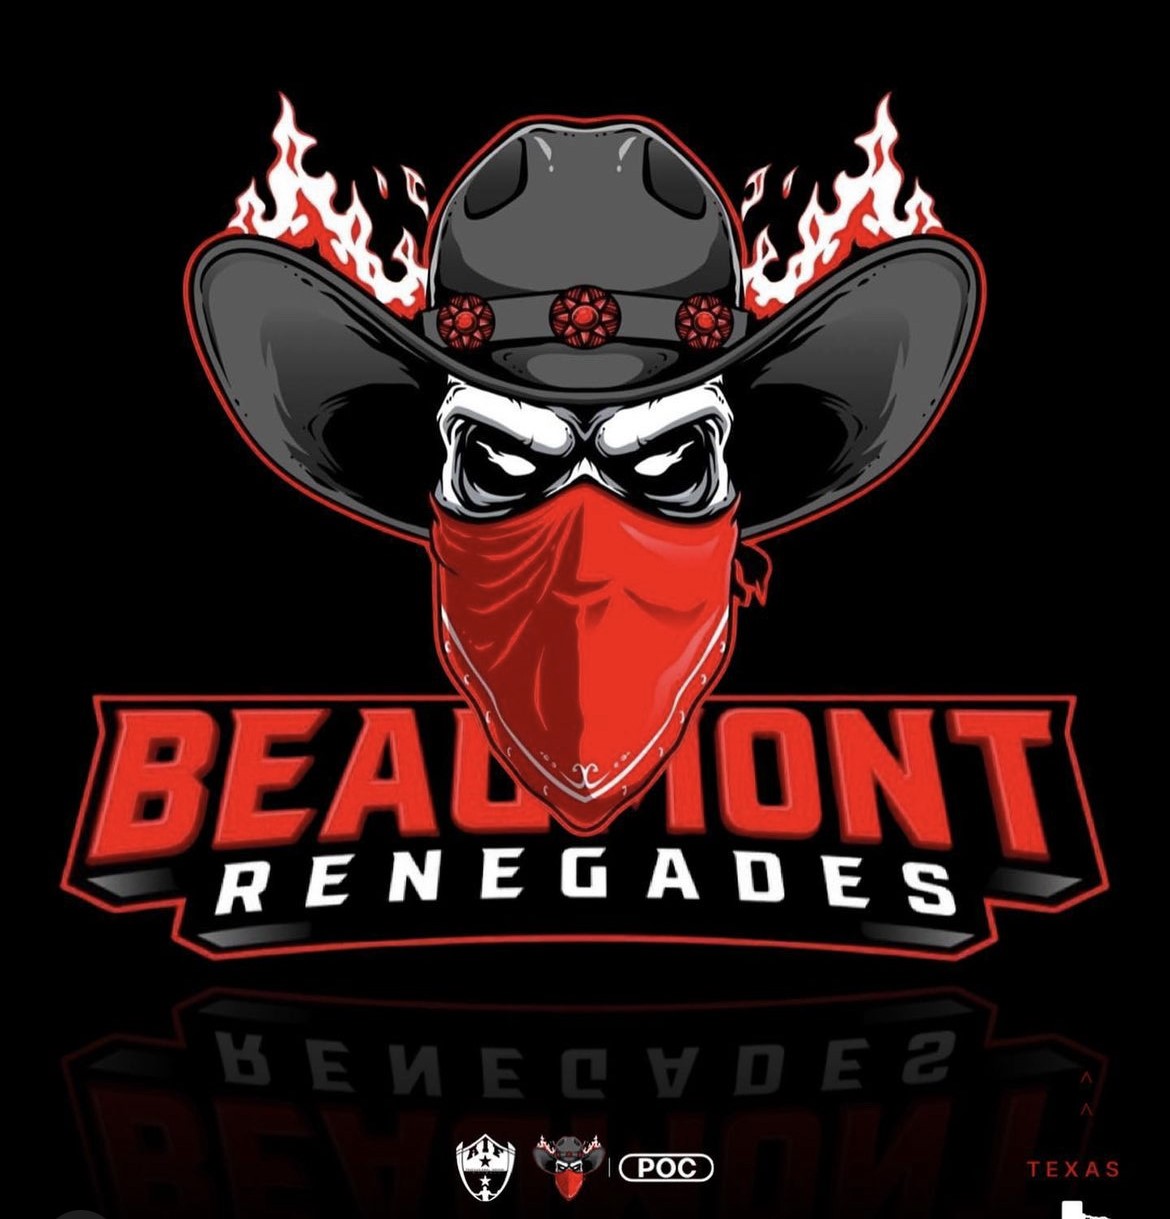 Beaumont Renegades announce plans for American Indoor Football